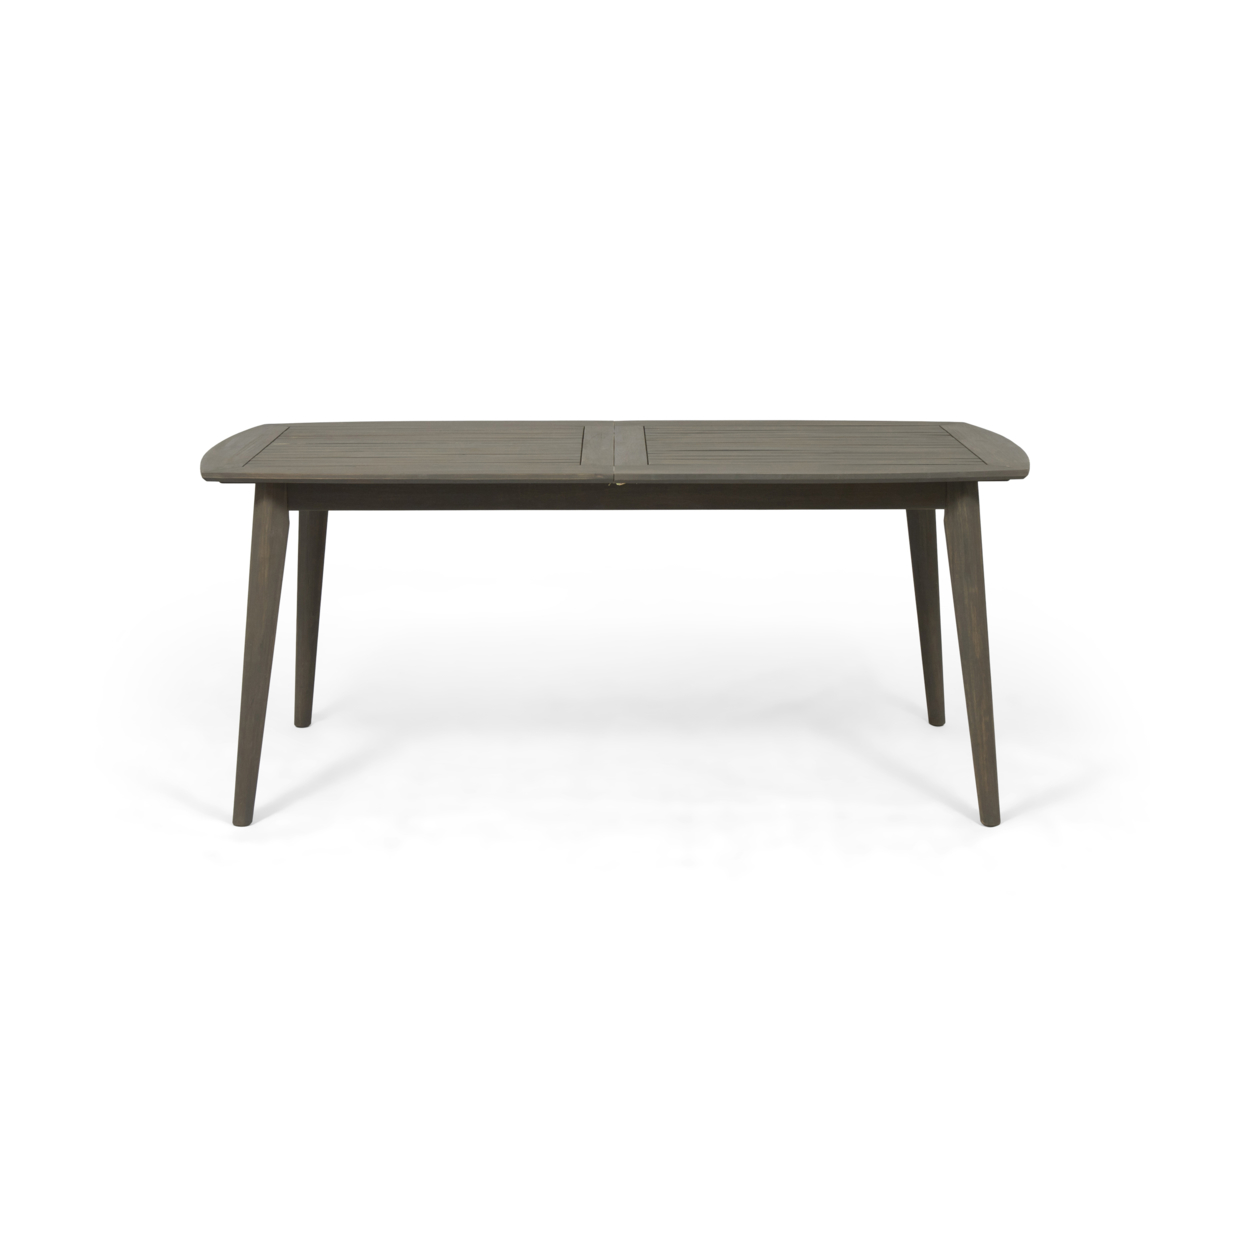 Candance Outdoor Acacia Wood Expandable Dining Table - Gray